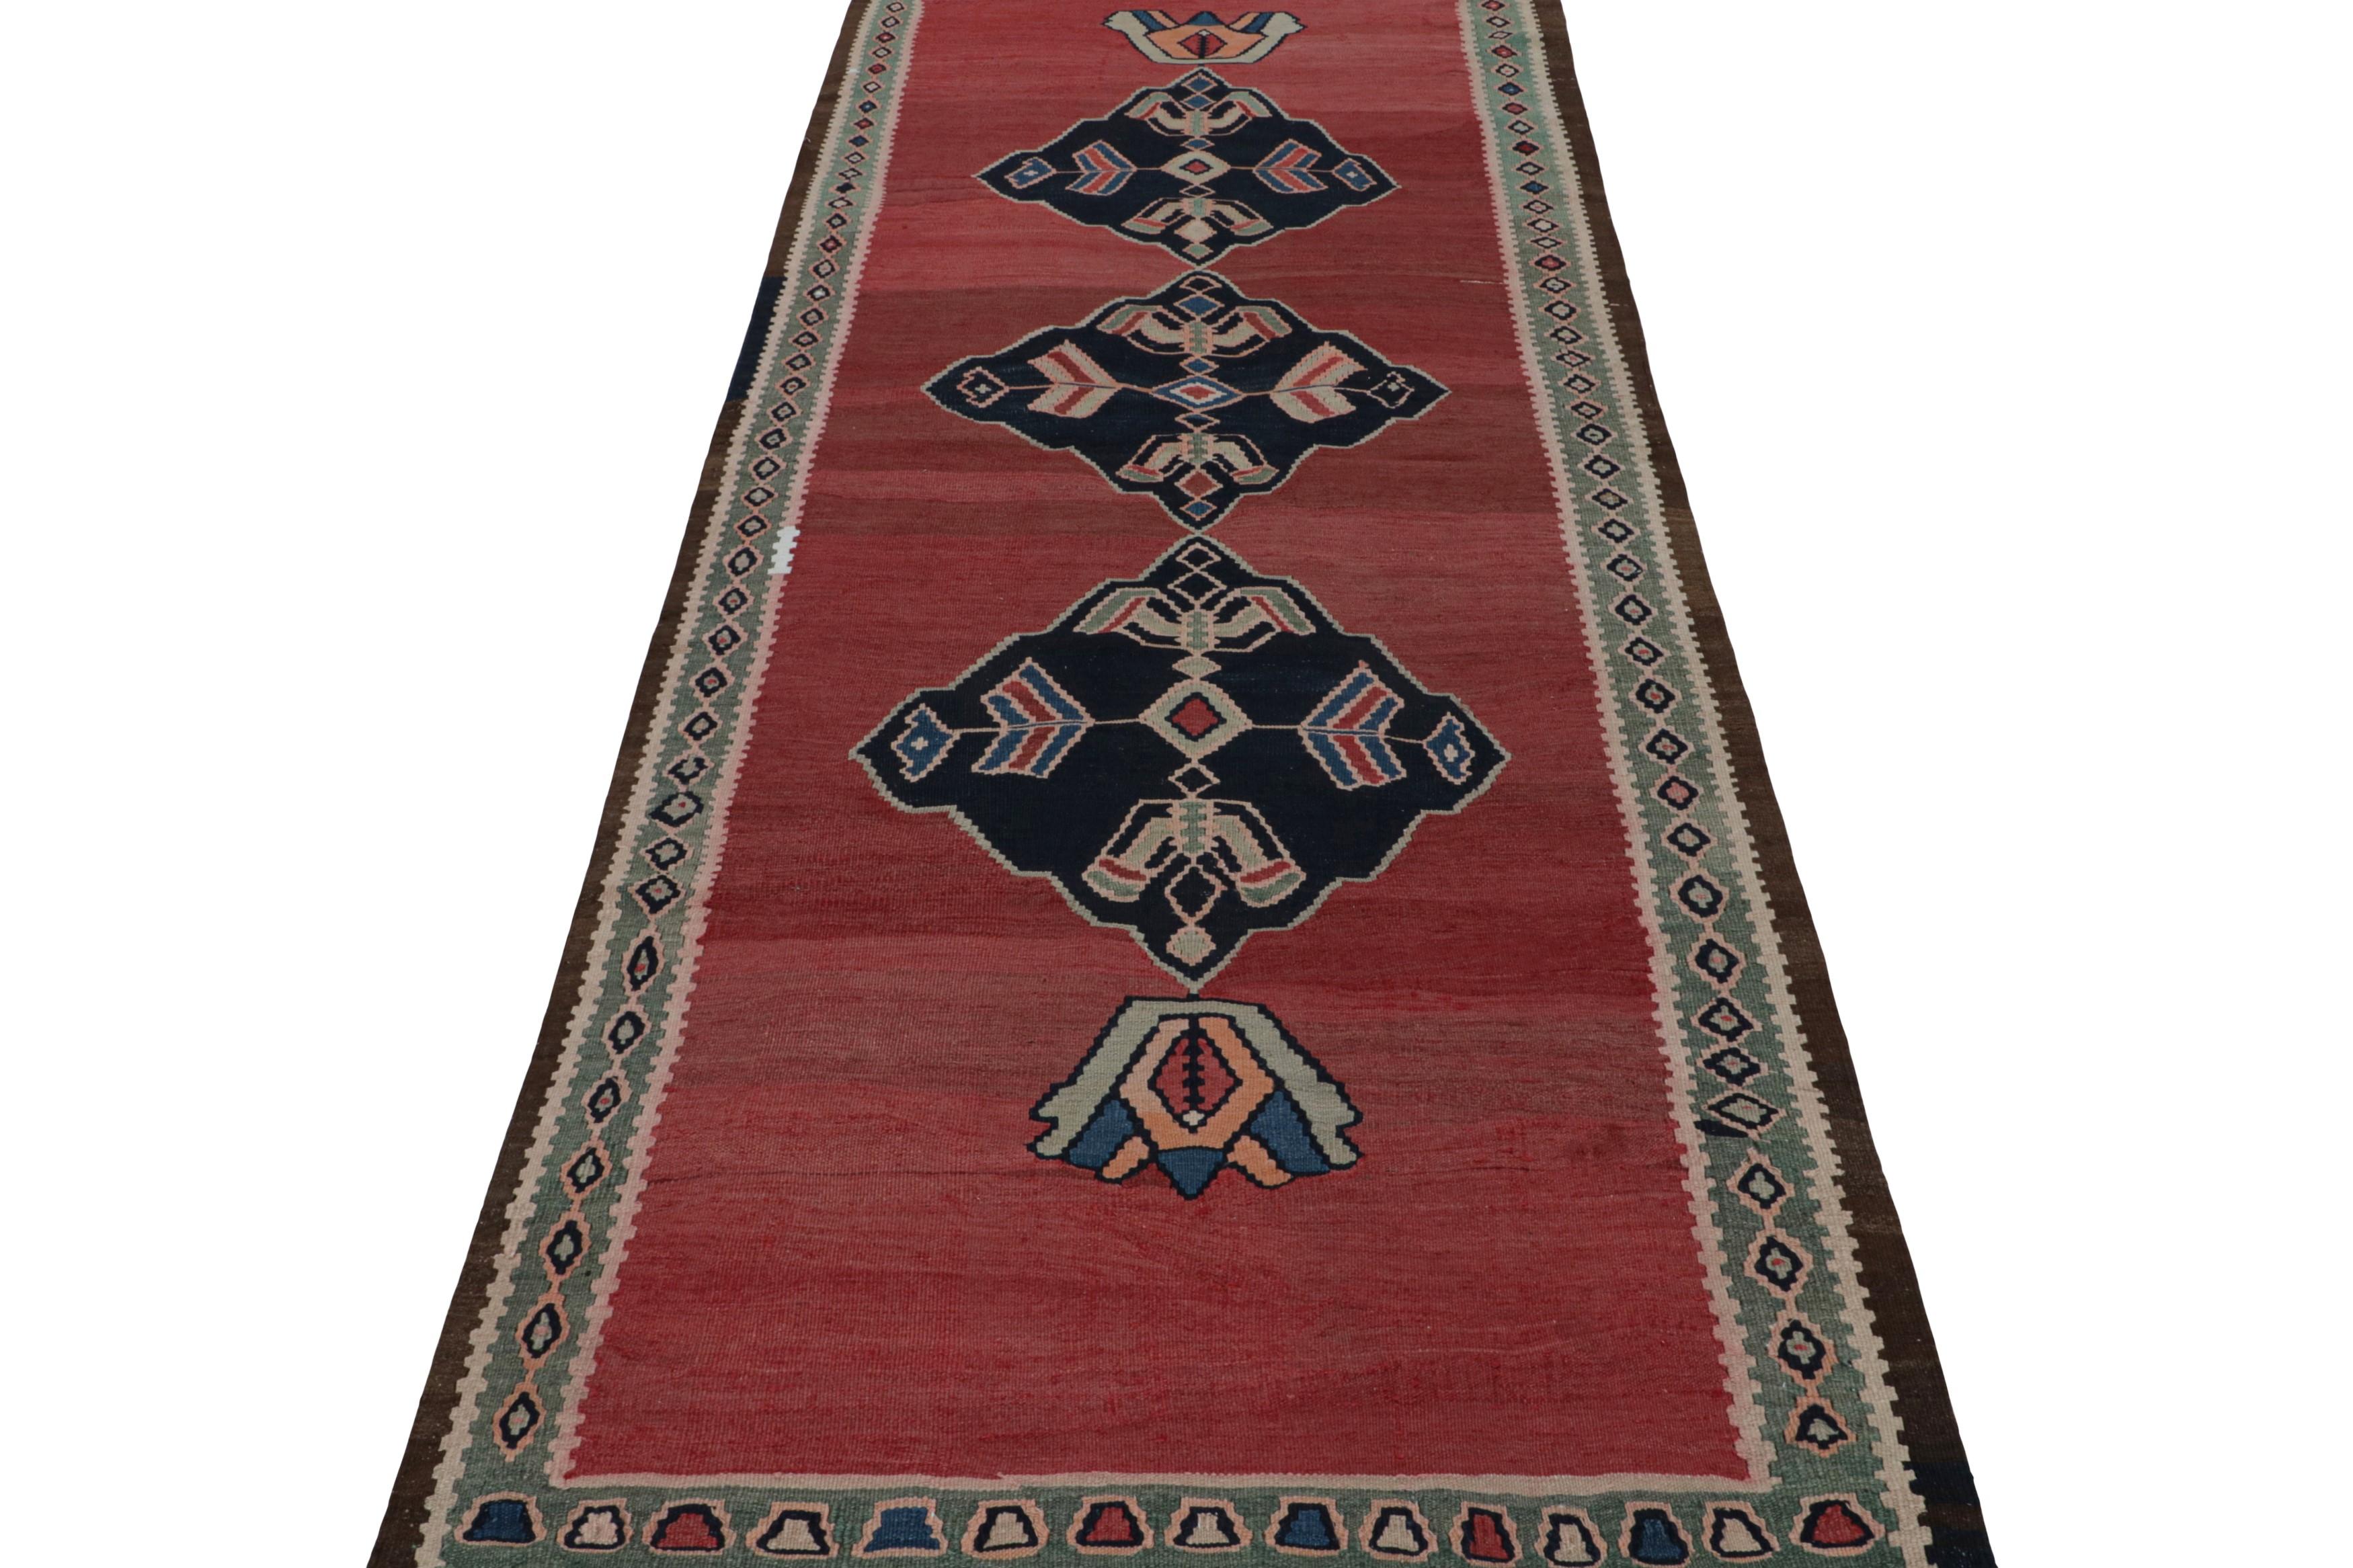 Tribal Vintage Afghani tribal Kilim rug with Open Field and Medallions from Rug & Kilim For Sale